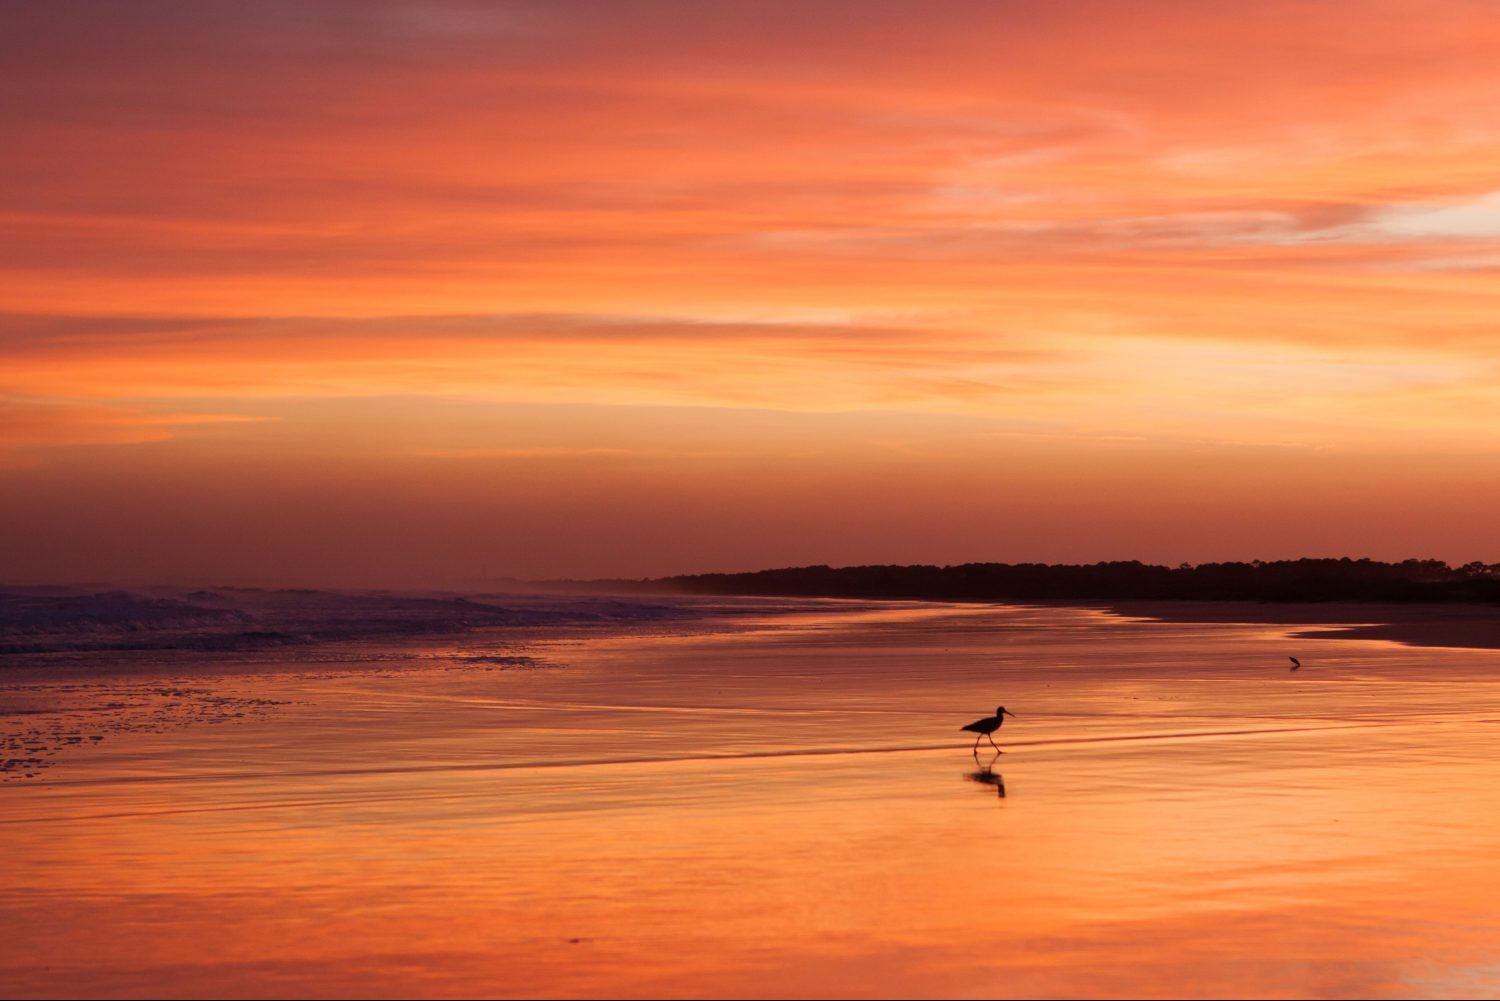 Read our Kiawah Island Destination Guide for the best tips on the area!